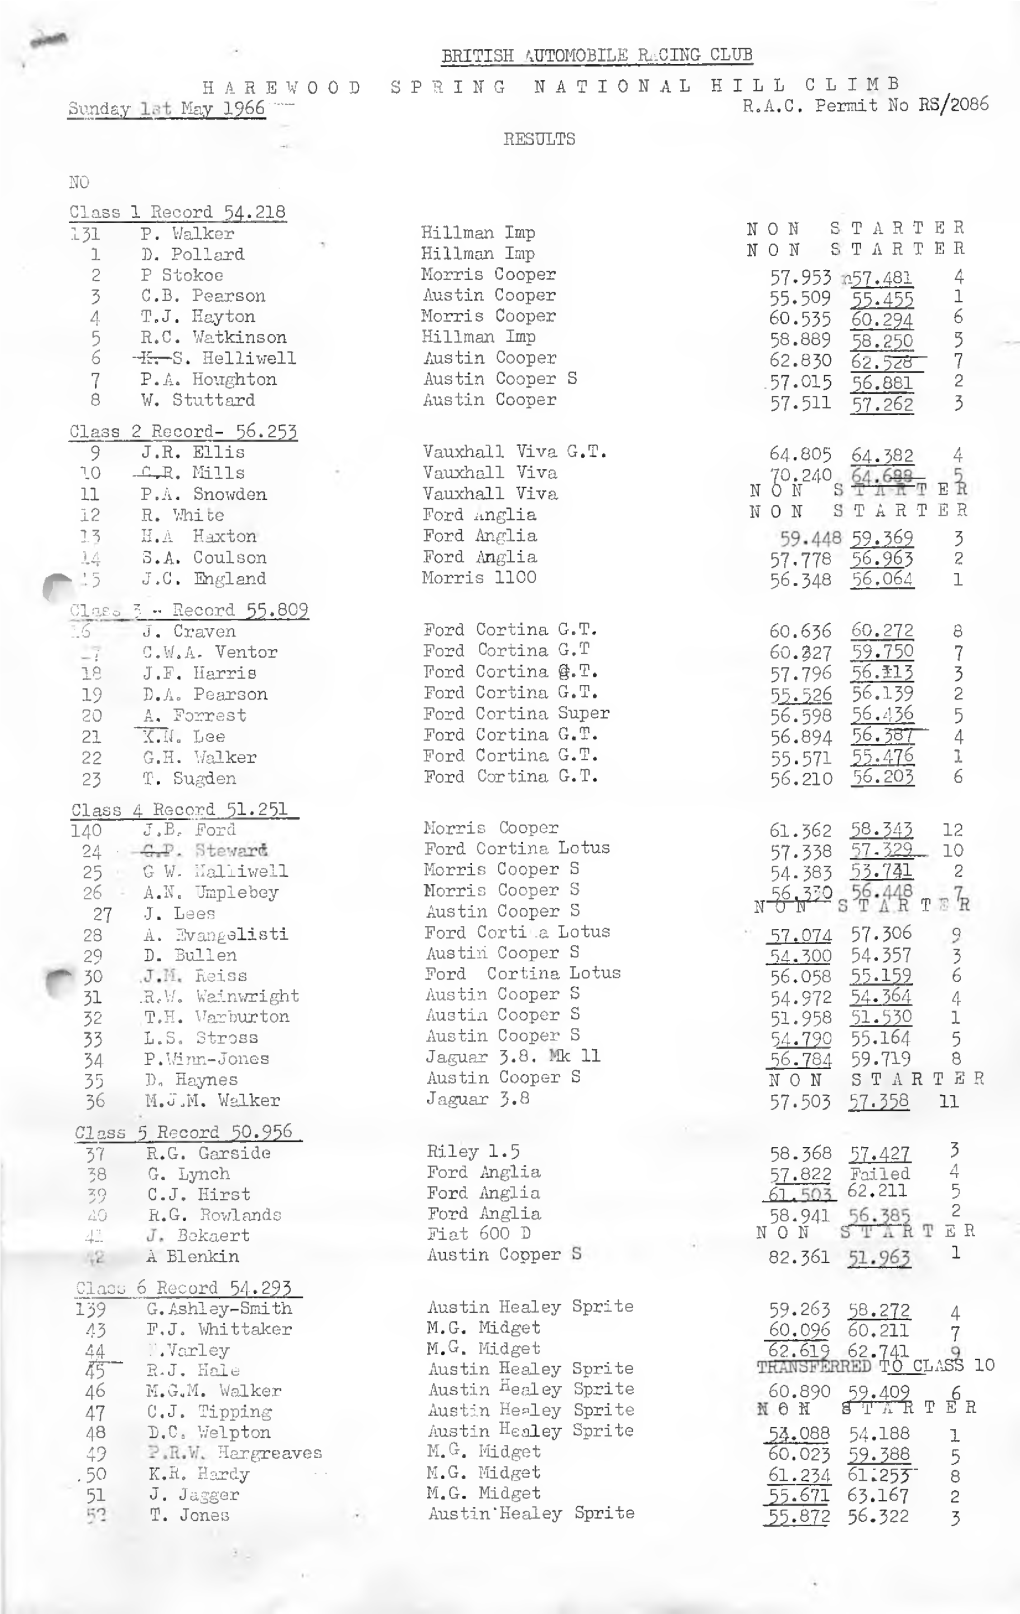 Results 1966 1St May Spring National